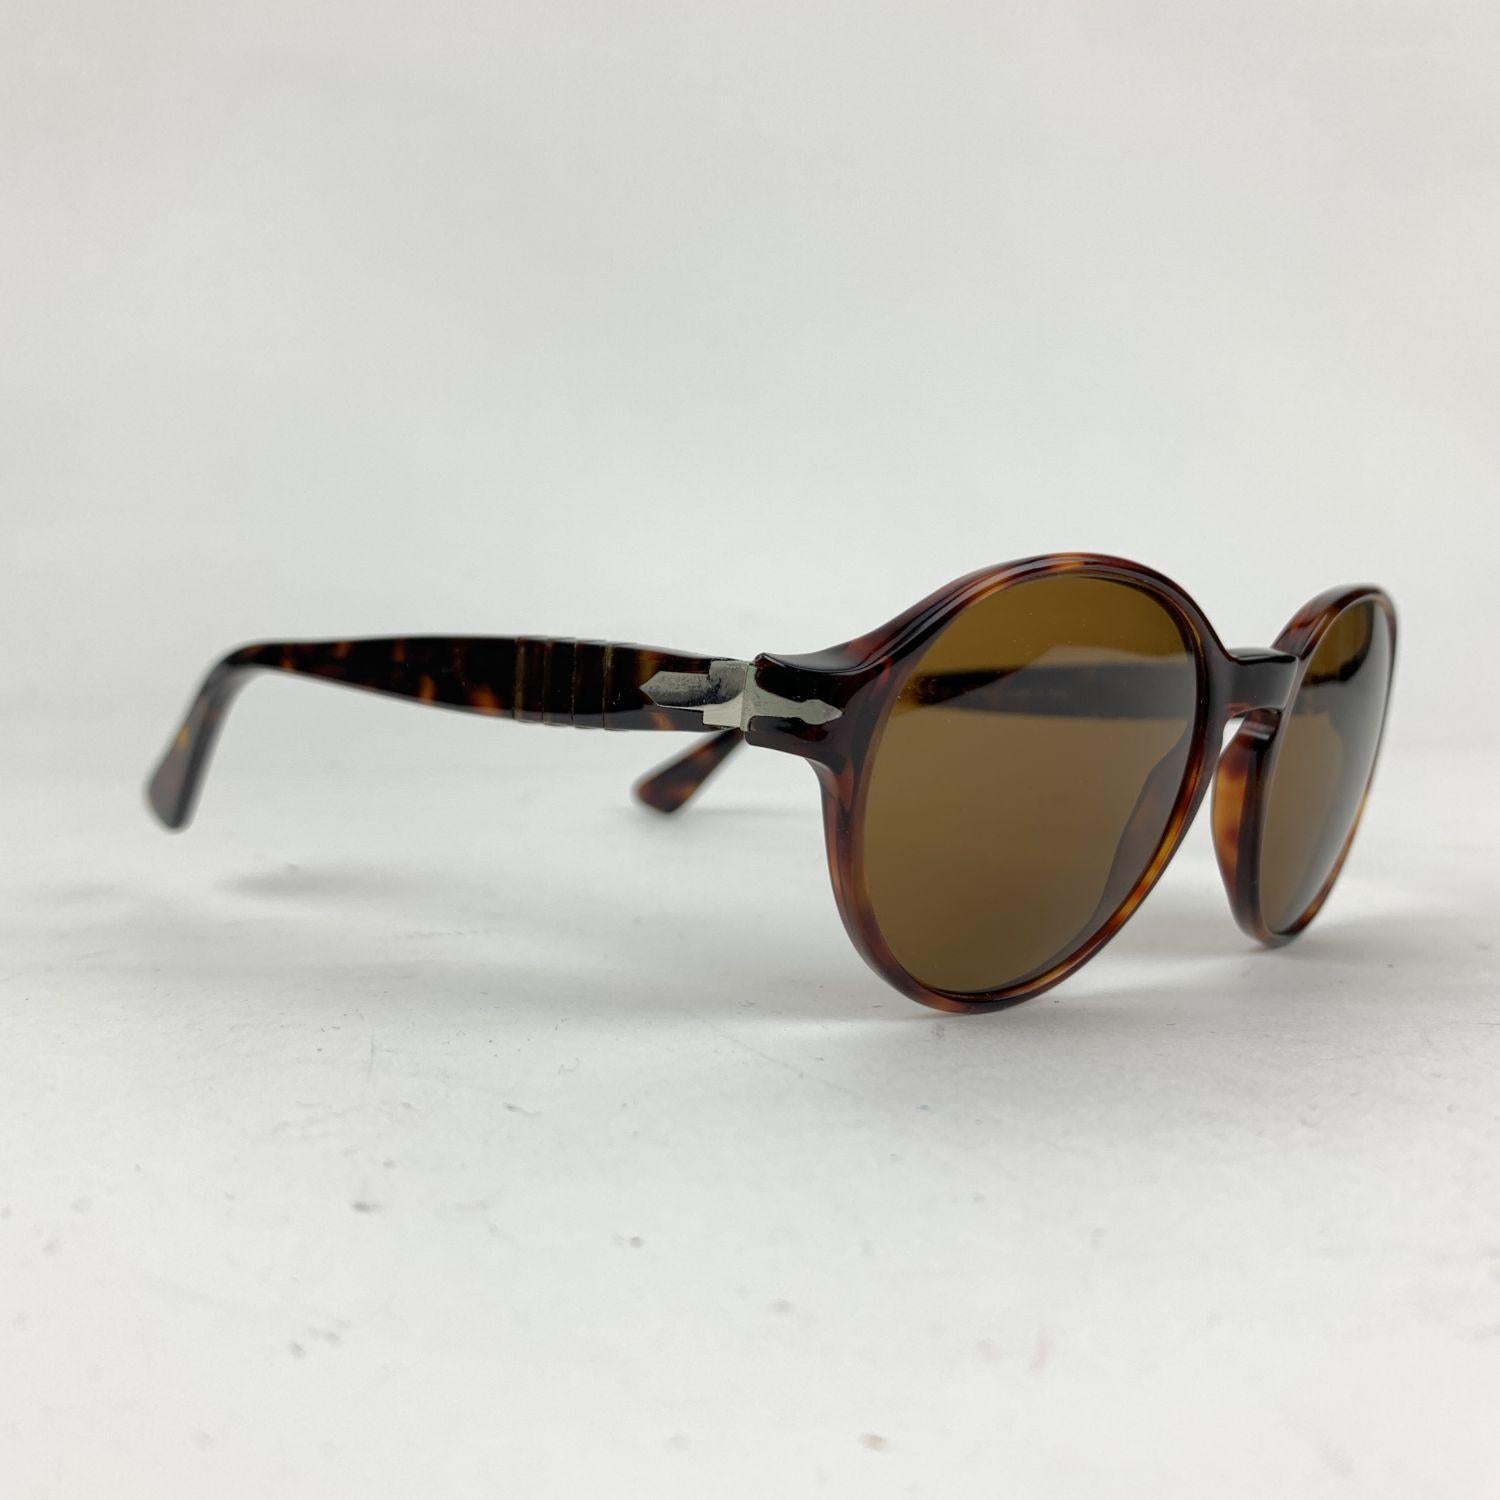 PERSOL Vintage Sunglasses- Model: 862. Brown acetate rounded frame, with original Persol brown 100% UV protection lenses PERSOL mark on each lens). Meflecto System on arms, that provide flexibility in the ear stems. Made in Italy. Style & Refs: 862